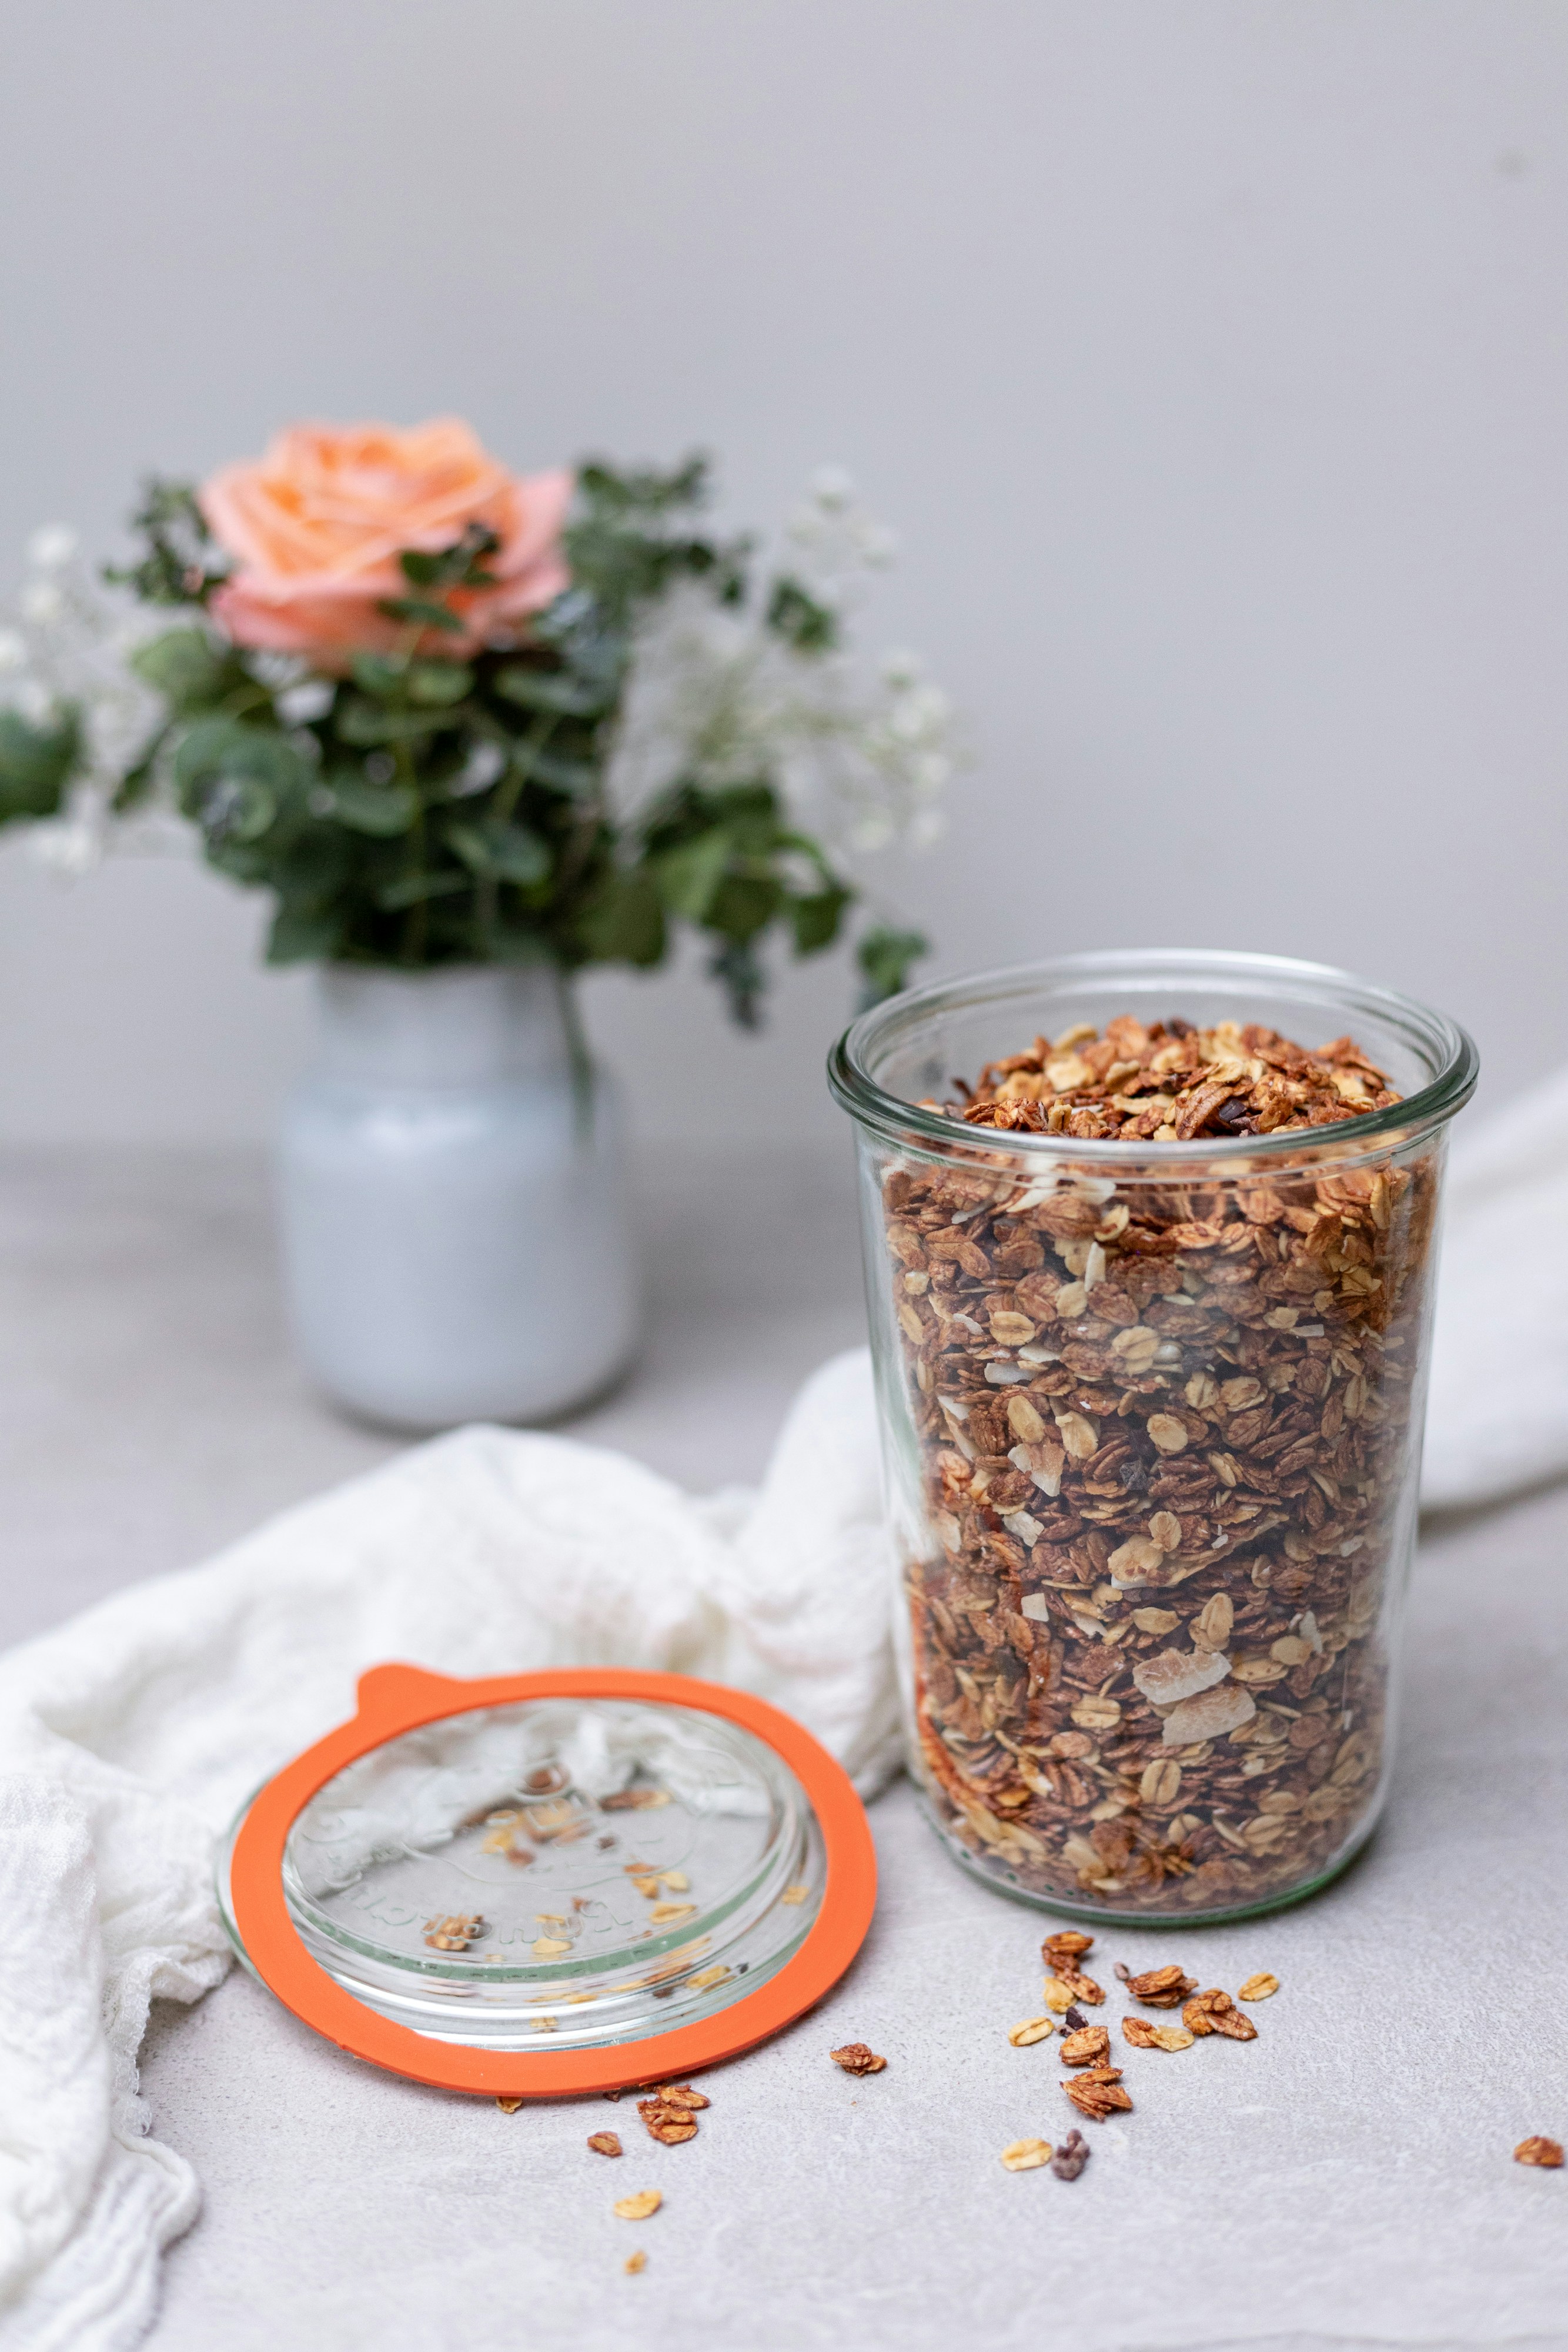 any granola fans out here? I find it a great way to add proteins and fats to your morning meal or to an afternoon snack